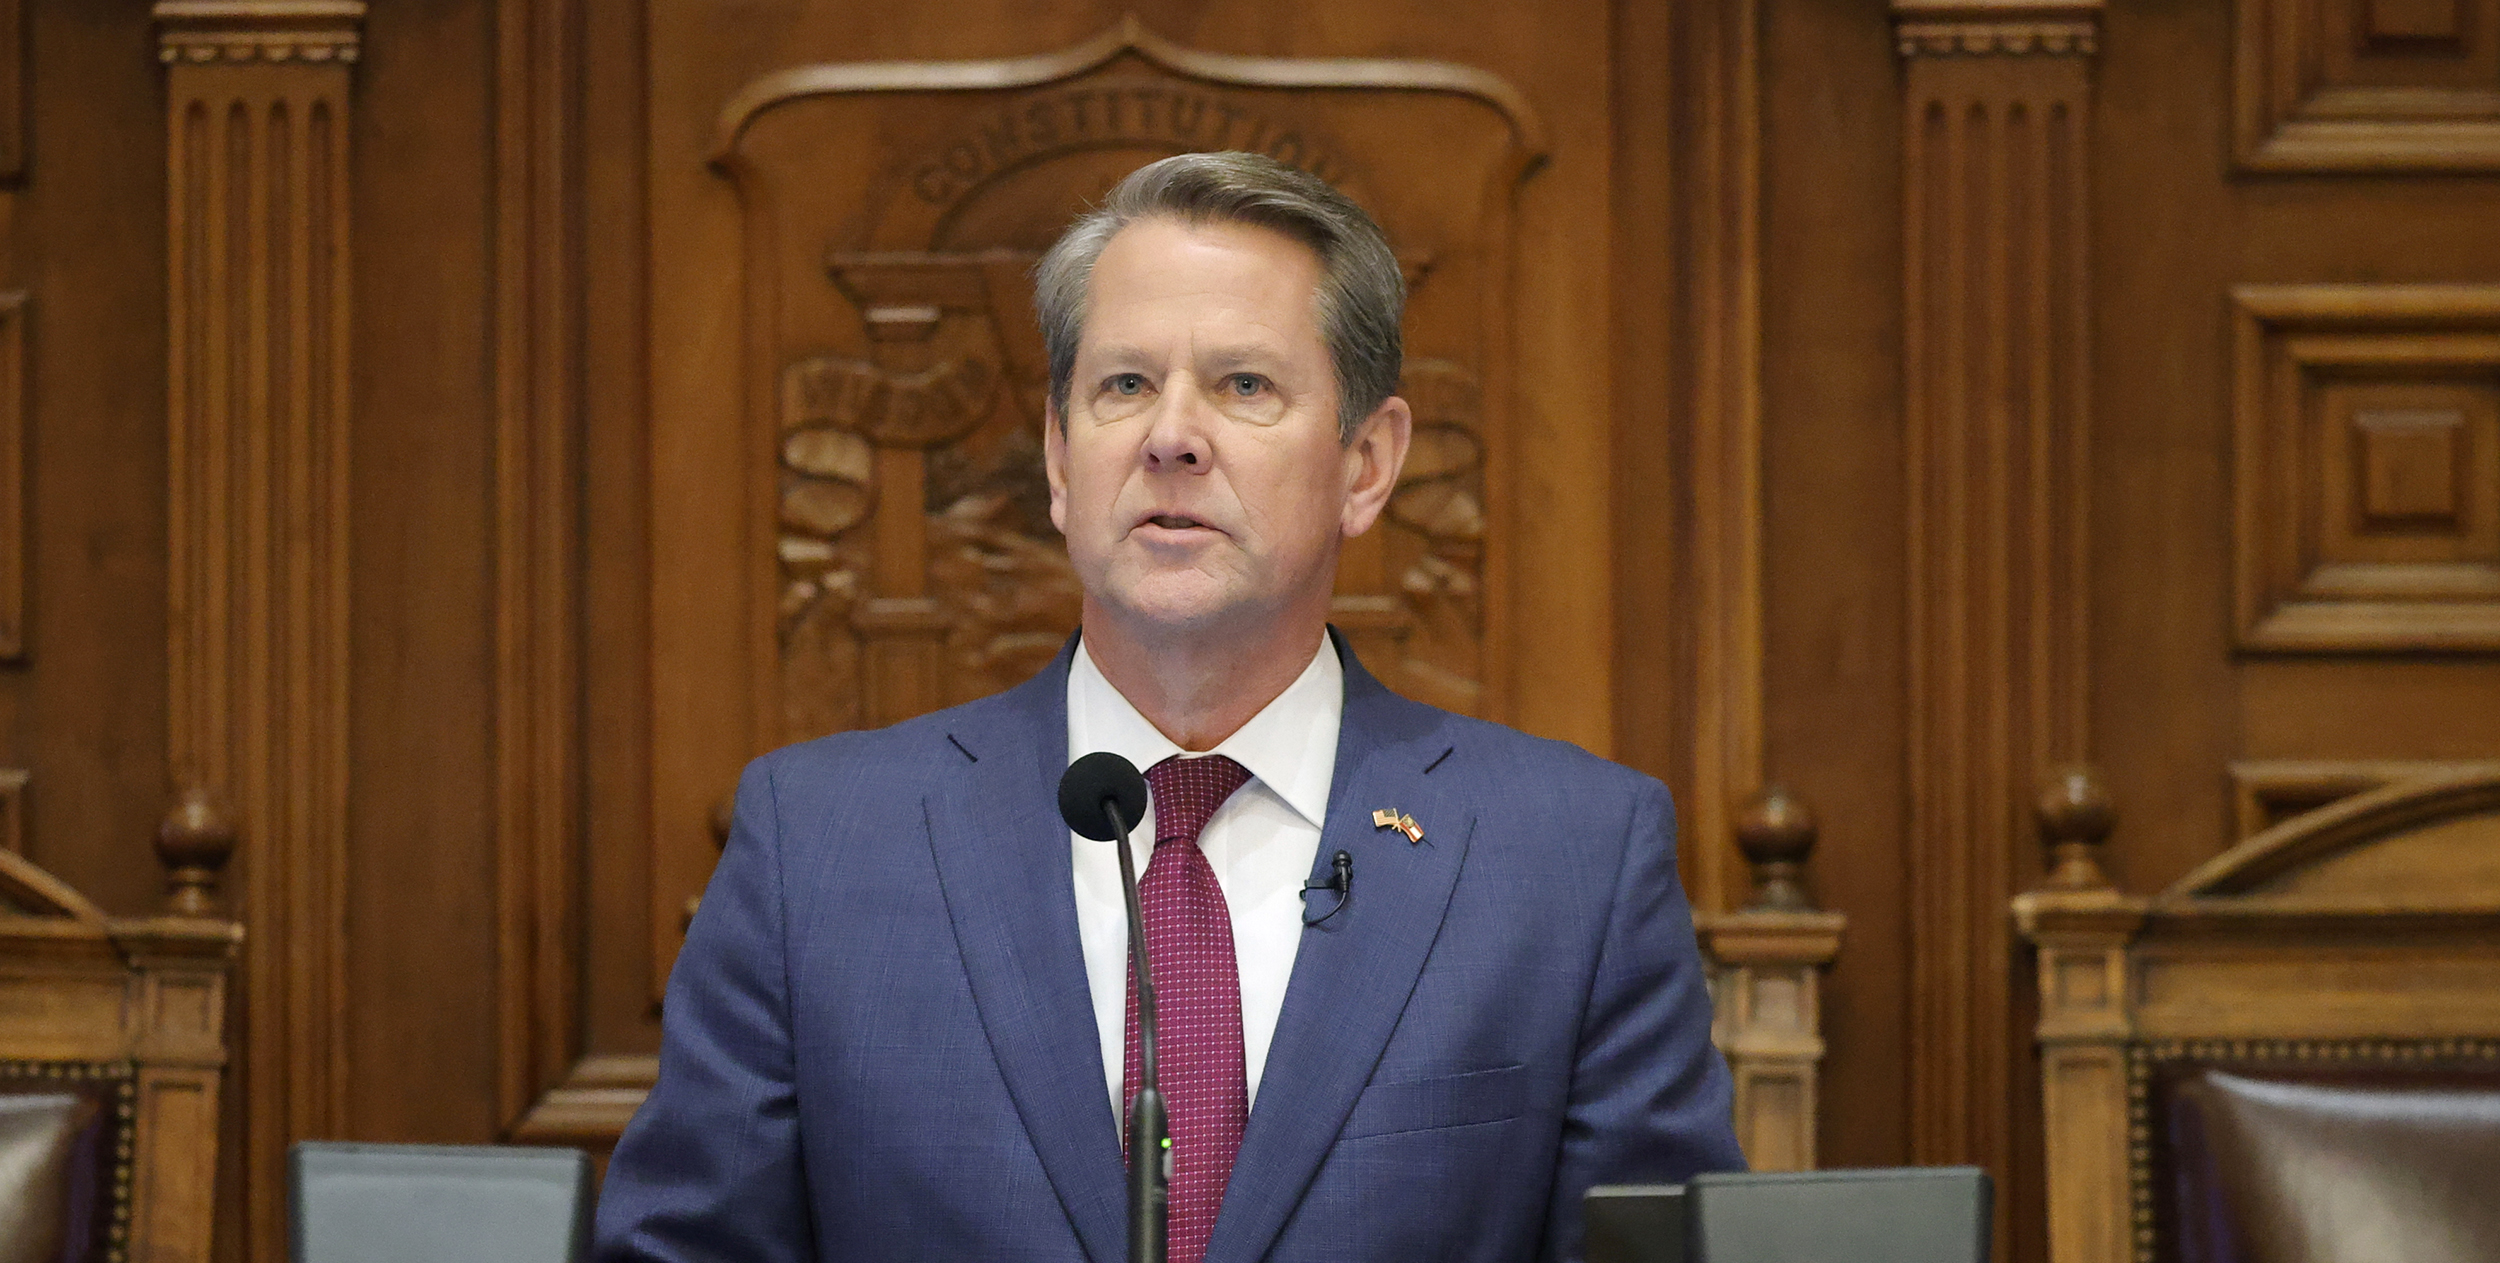 FILE - Georgia Gov. Brian Kemp delivers the State of the State address on the House floor of the state Capitol, Jan. 25, 2023, in Atlanta. The Republican Kemp announced final tax collections for 2023 on Wednesday, July 12, indicating the state will run a roughly $5 billion surplus for the budget year just ended. (AP Photo/Alex Slitz, File)